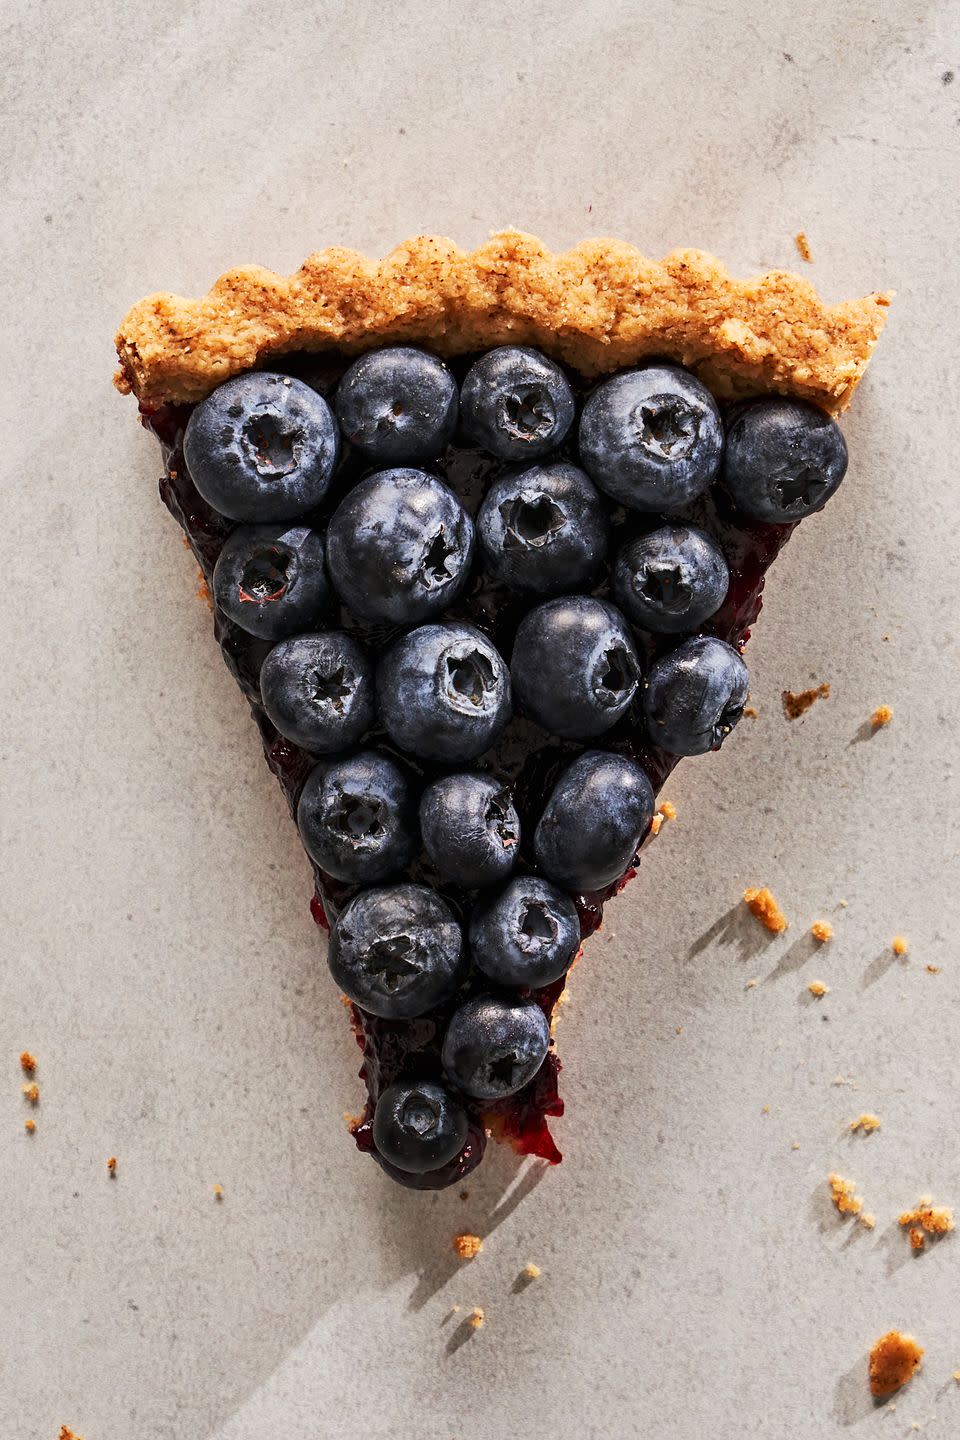 Blueberry Tart with Brown Butter Crust